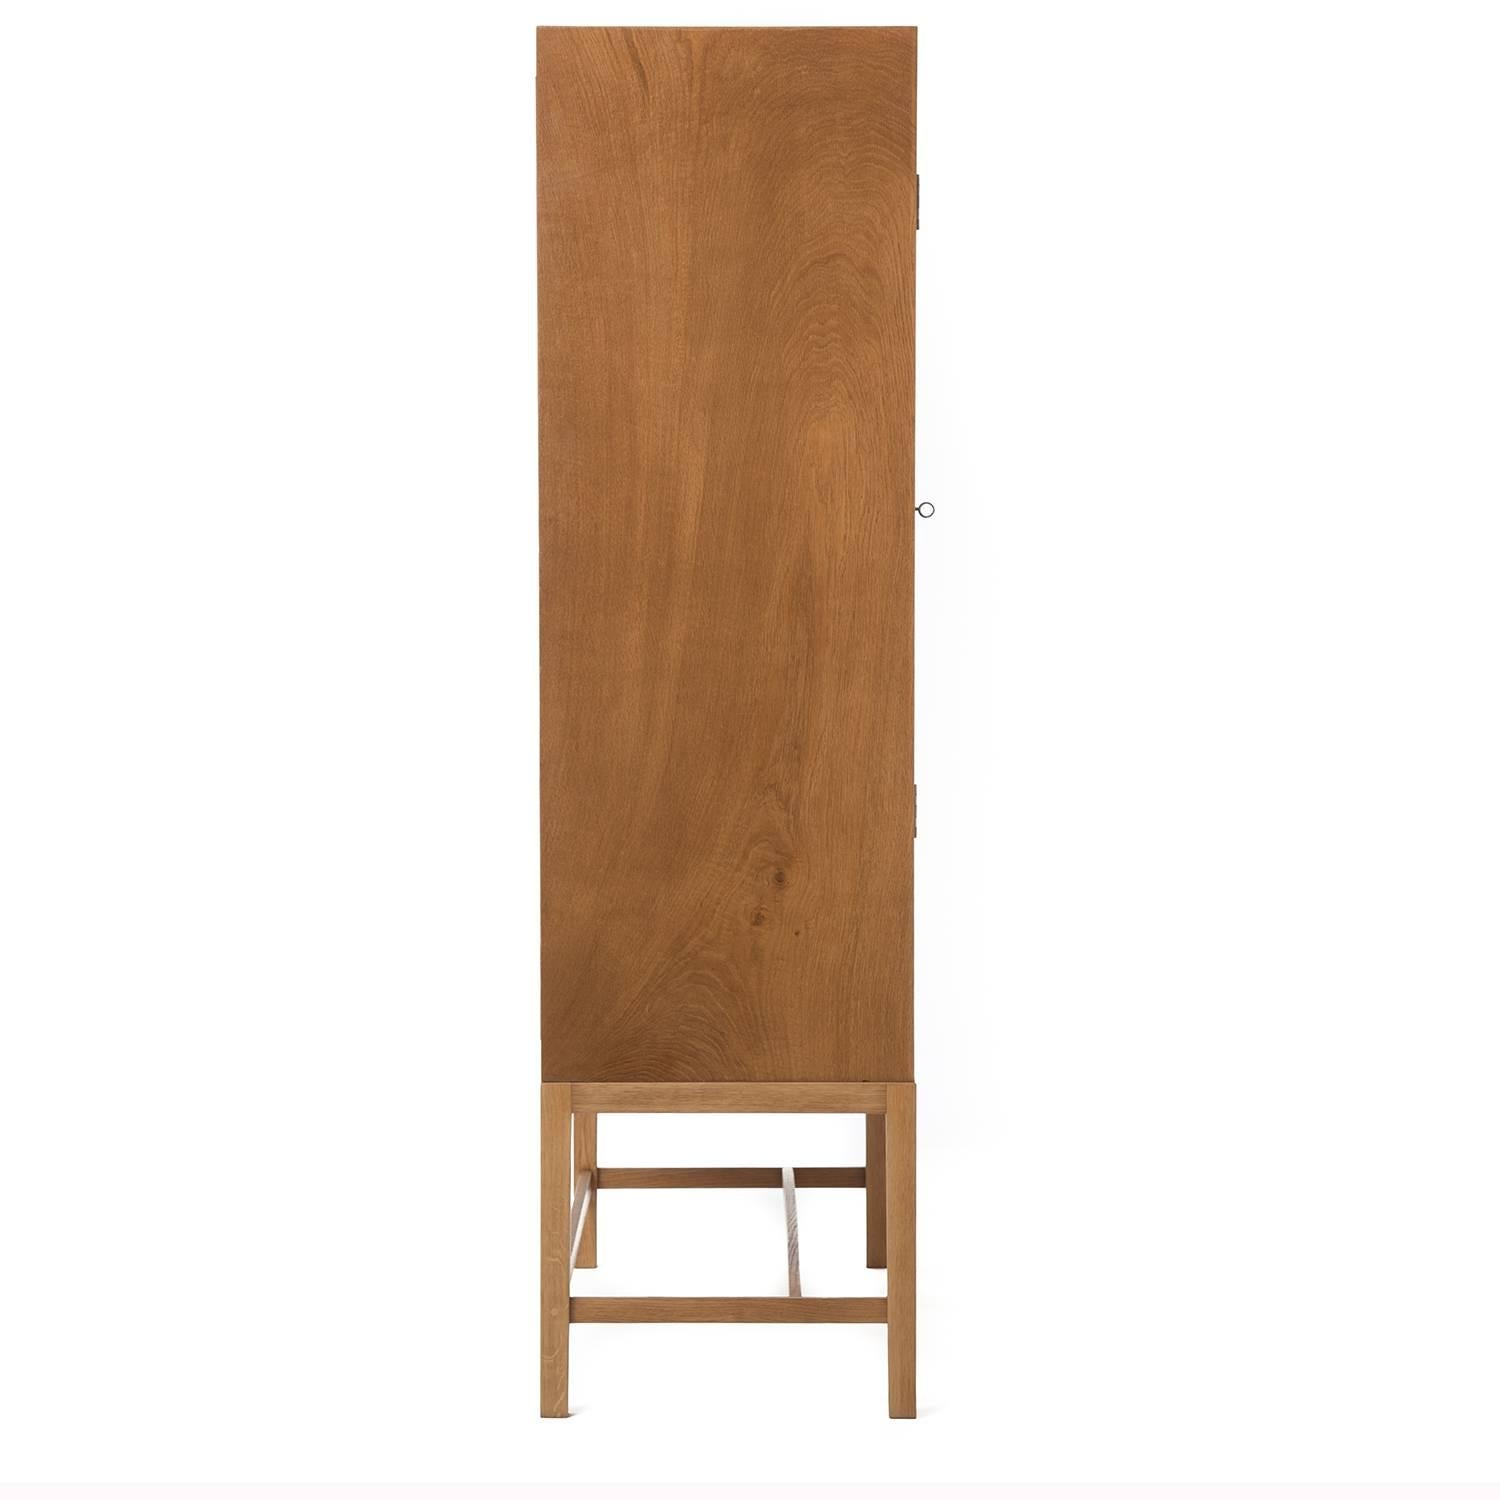 Standing tall at 65" this white oak cabinet provides ample storage. Each inside shelf pulls out for easy accessibility. Non-adjustable. Please inquire for height dimensions between shelves. 

Professional, skilled furniture restoration is an